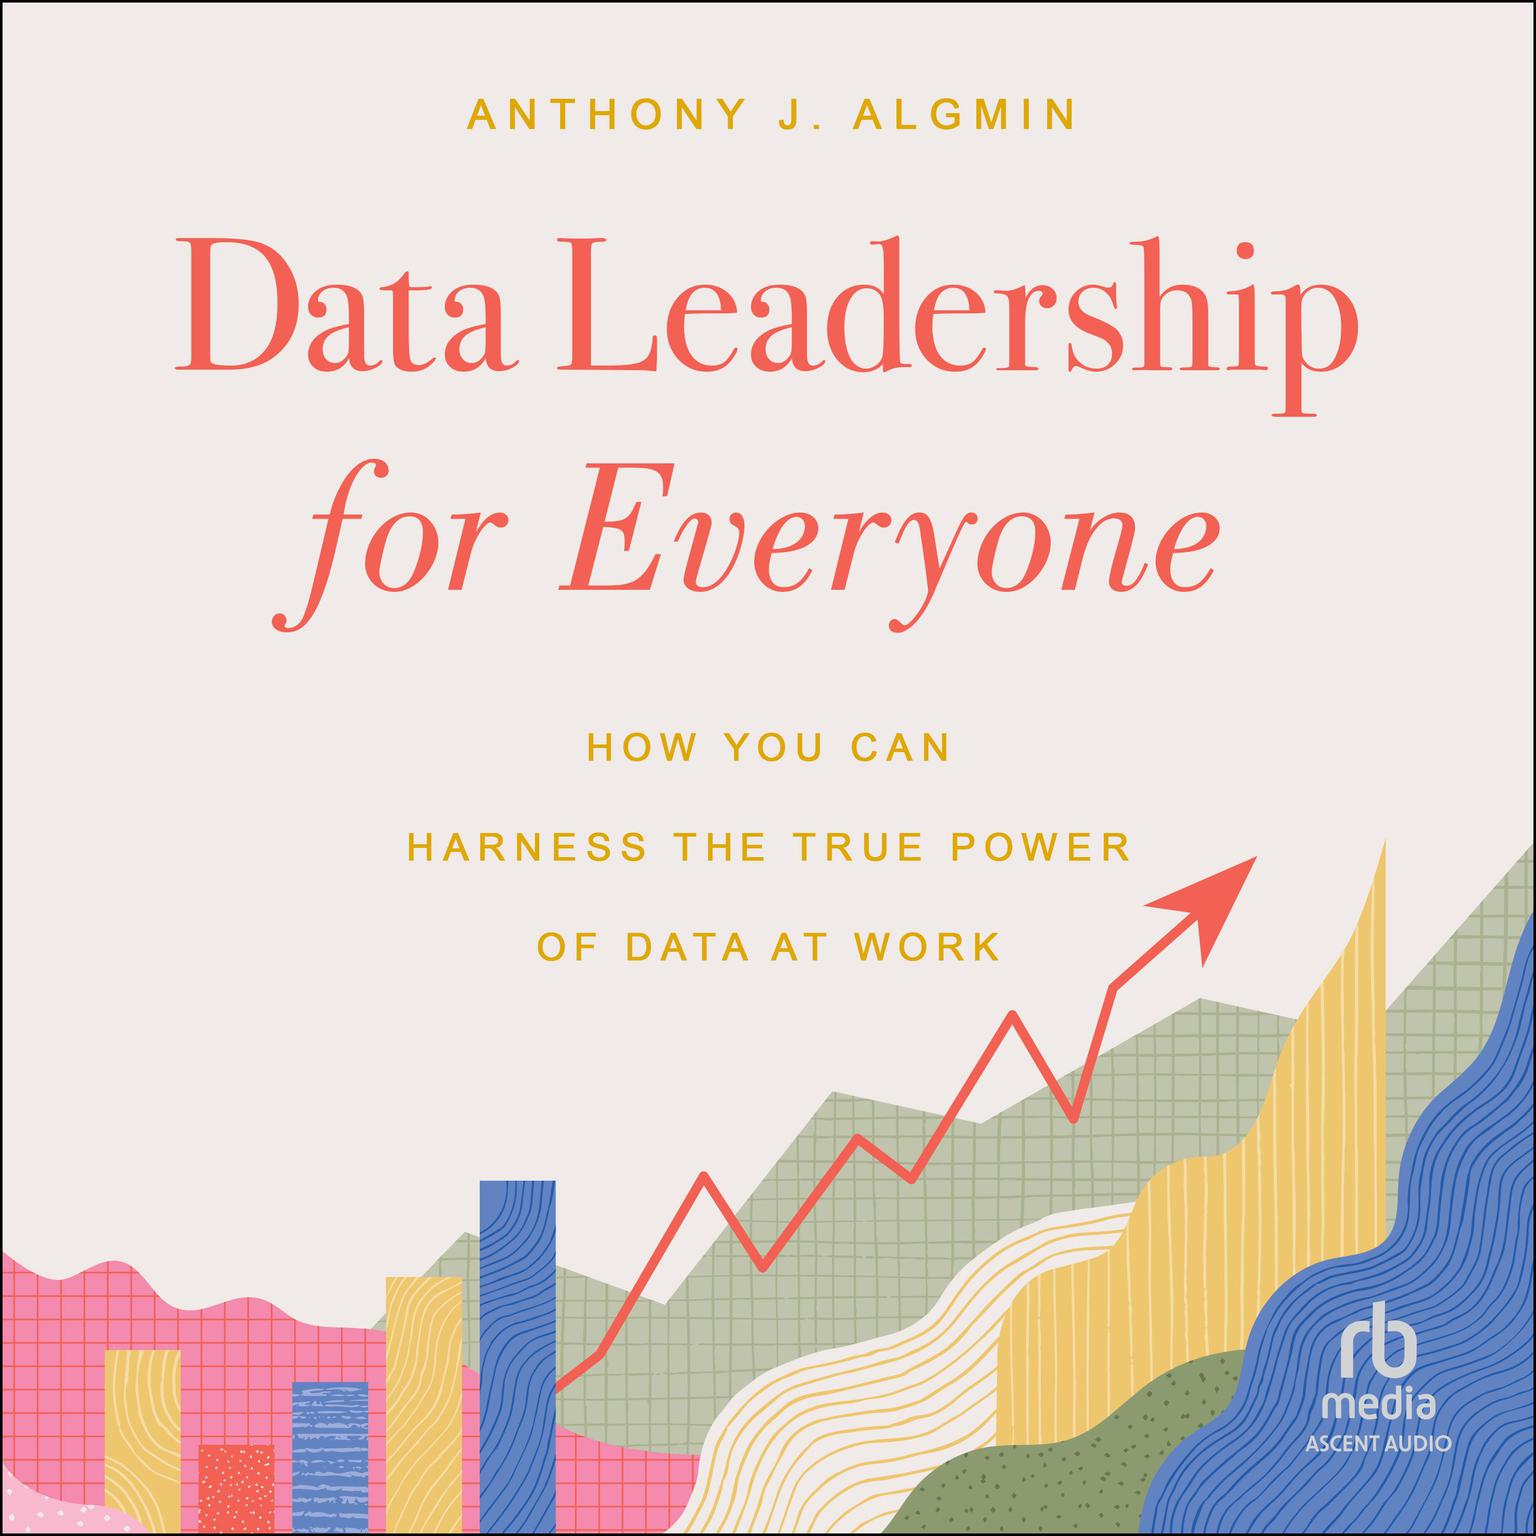 Data Leadership for Everyone: How You Can Harness the True Power of Data at Work Audiobook, by Anthony Algmin